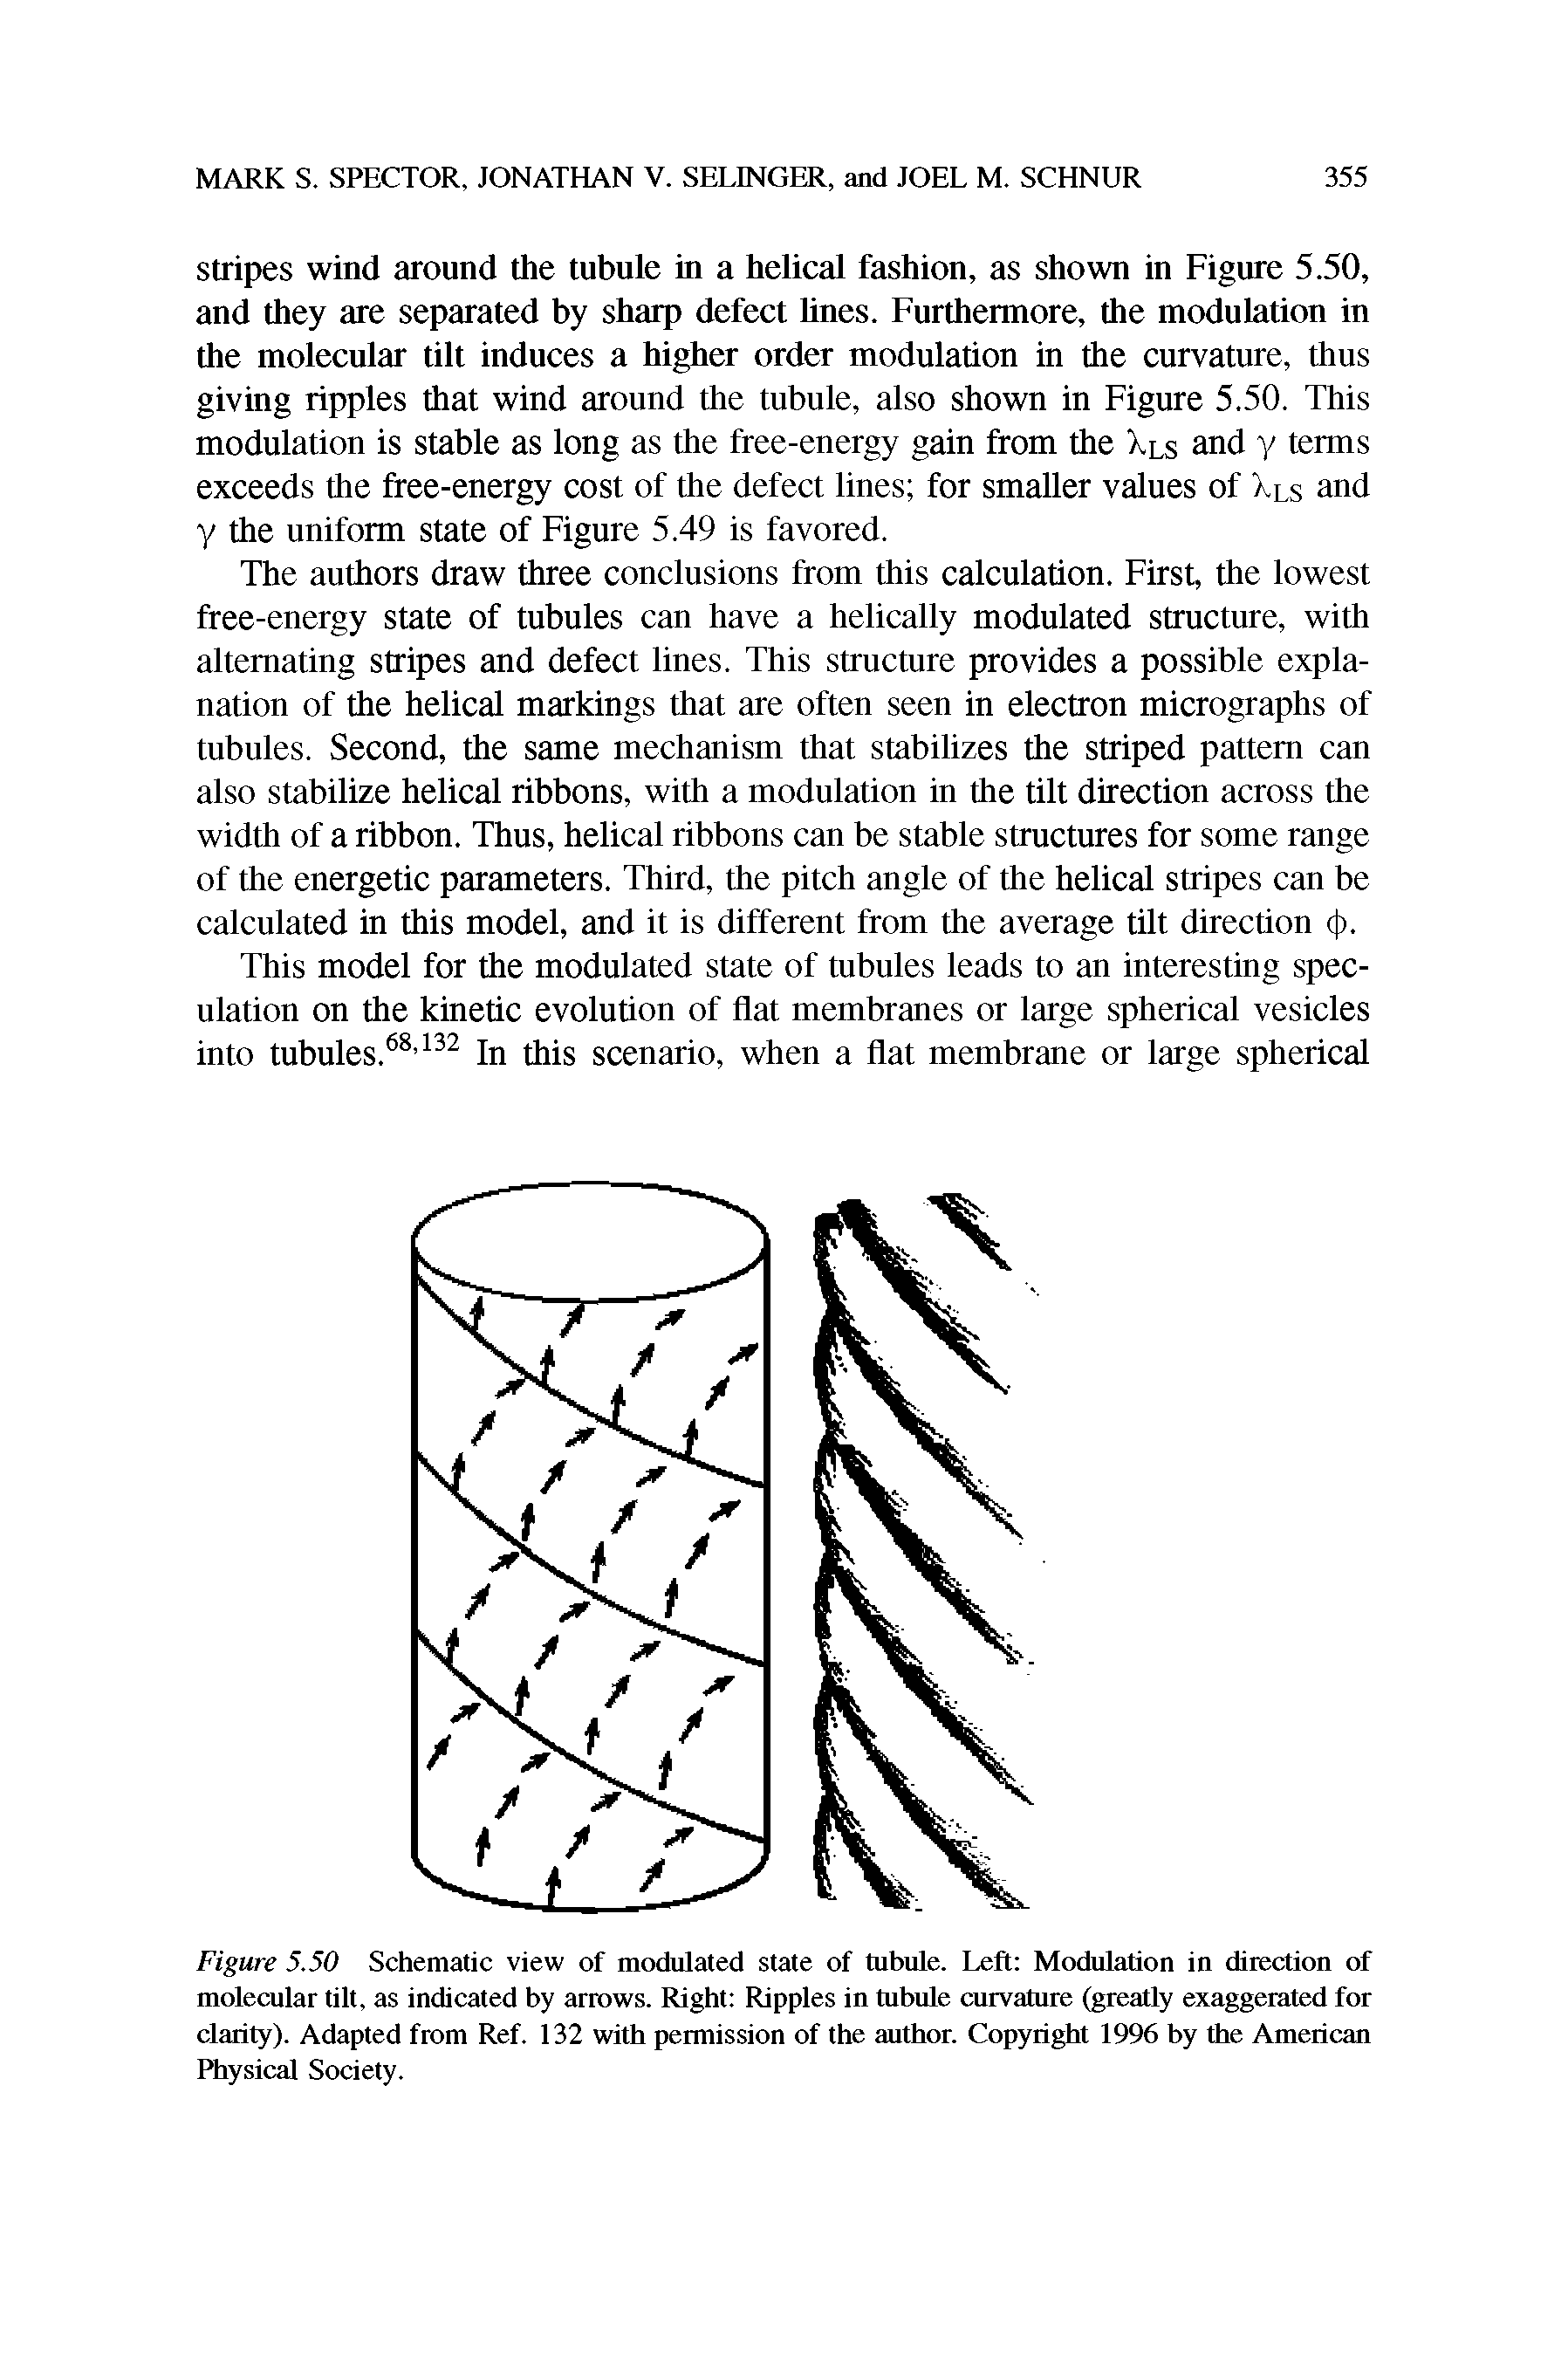 Figure 5.50 Schematic view of modulated state of tubule. Left Modulation in direction of molecular tilt, as indicated by arrows. Right Ripples in tubule curvature (greatly exaggerated for clarity). Adapted from Ref. 132 with permission of the author. Copyright 1996 by the American Physical Society.